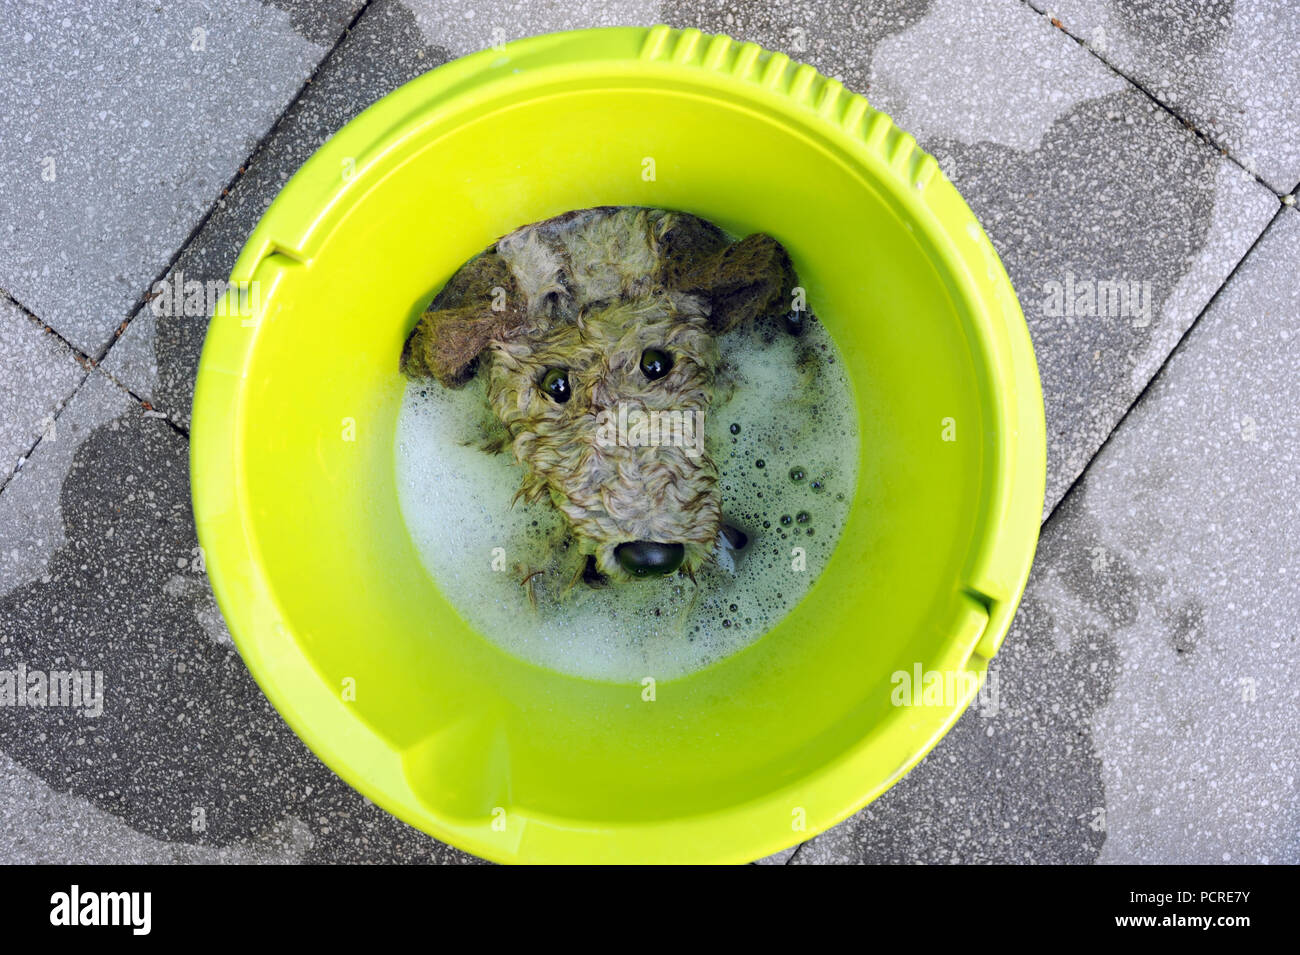 SOFT TOY DOG BEING WASHED IN BUCKET RE CHILDRENS TOYS WASHING CLEAN GERMS CLEANING HEALTH IMMUNITY IMMUNE UK Stock Photo